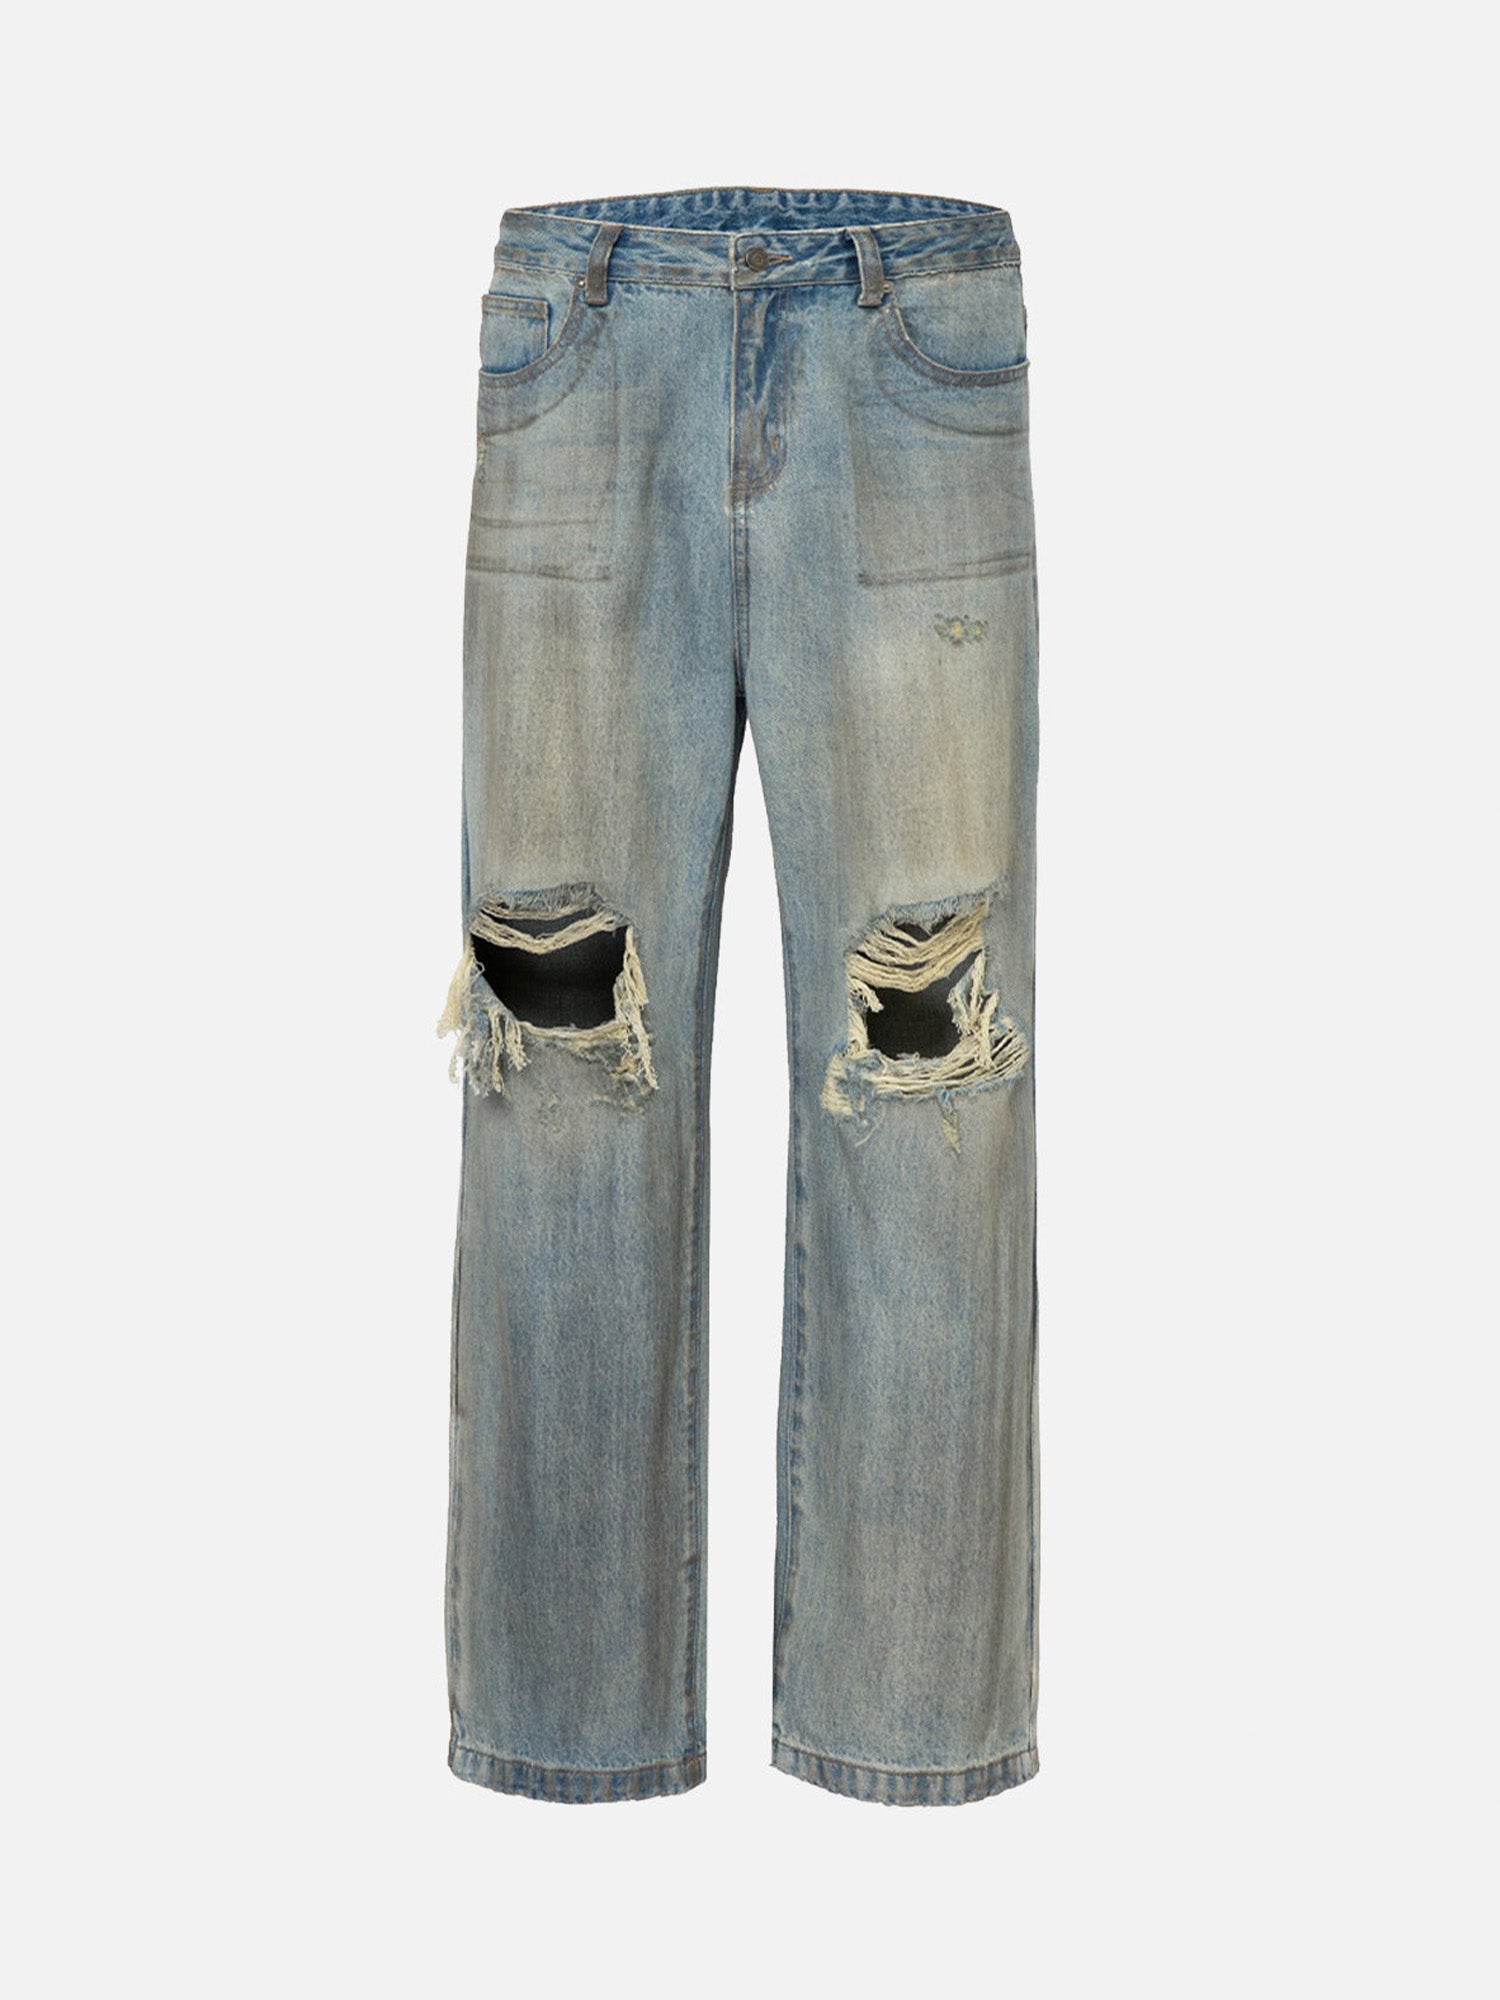 Street Retro Washed And Distressed Hip Hop Straight Jeans